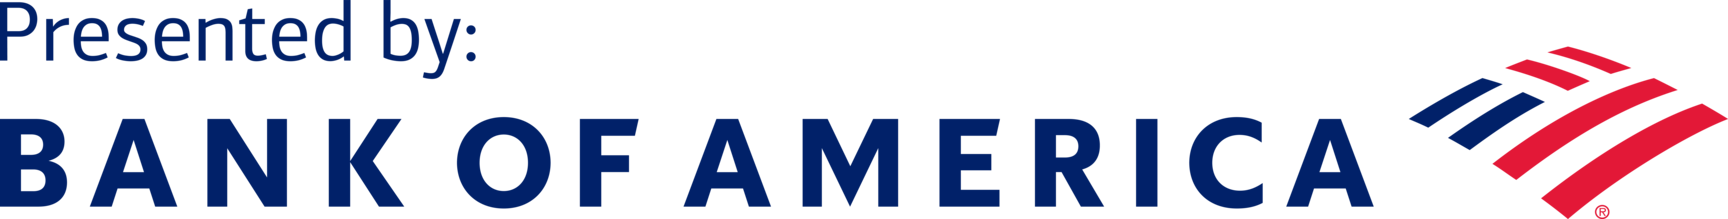 Presented by Bank of America logo